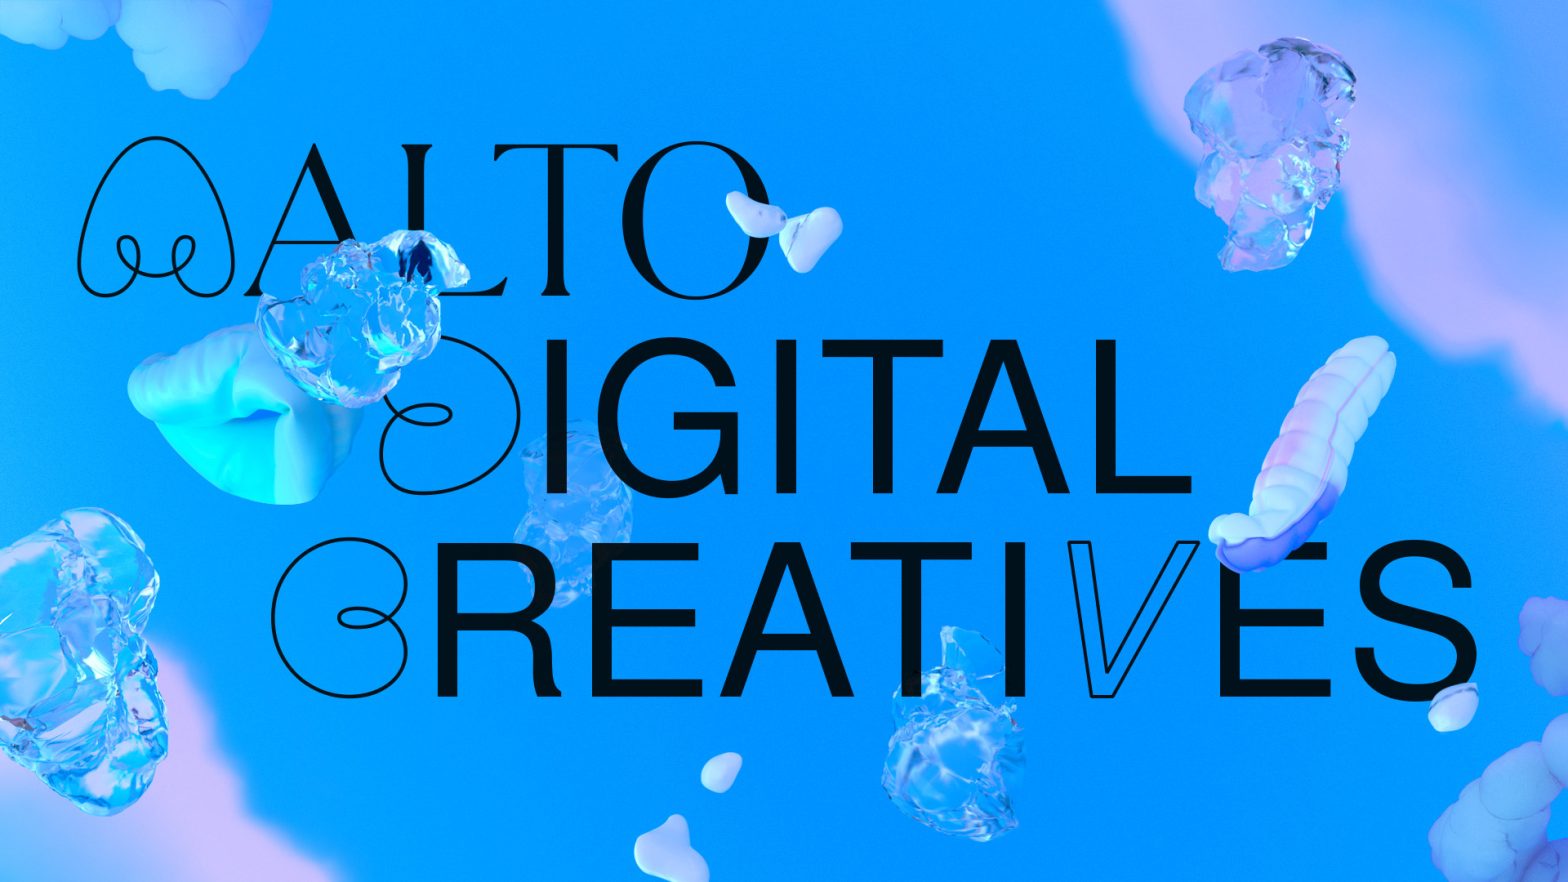 Blue background with organic abtsract figures and stylized text Aalto Digital Creatives